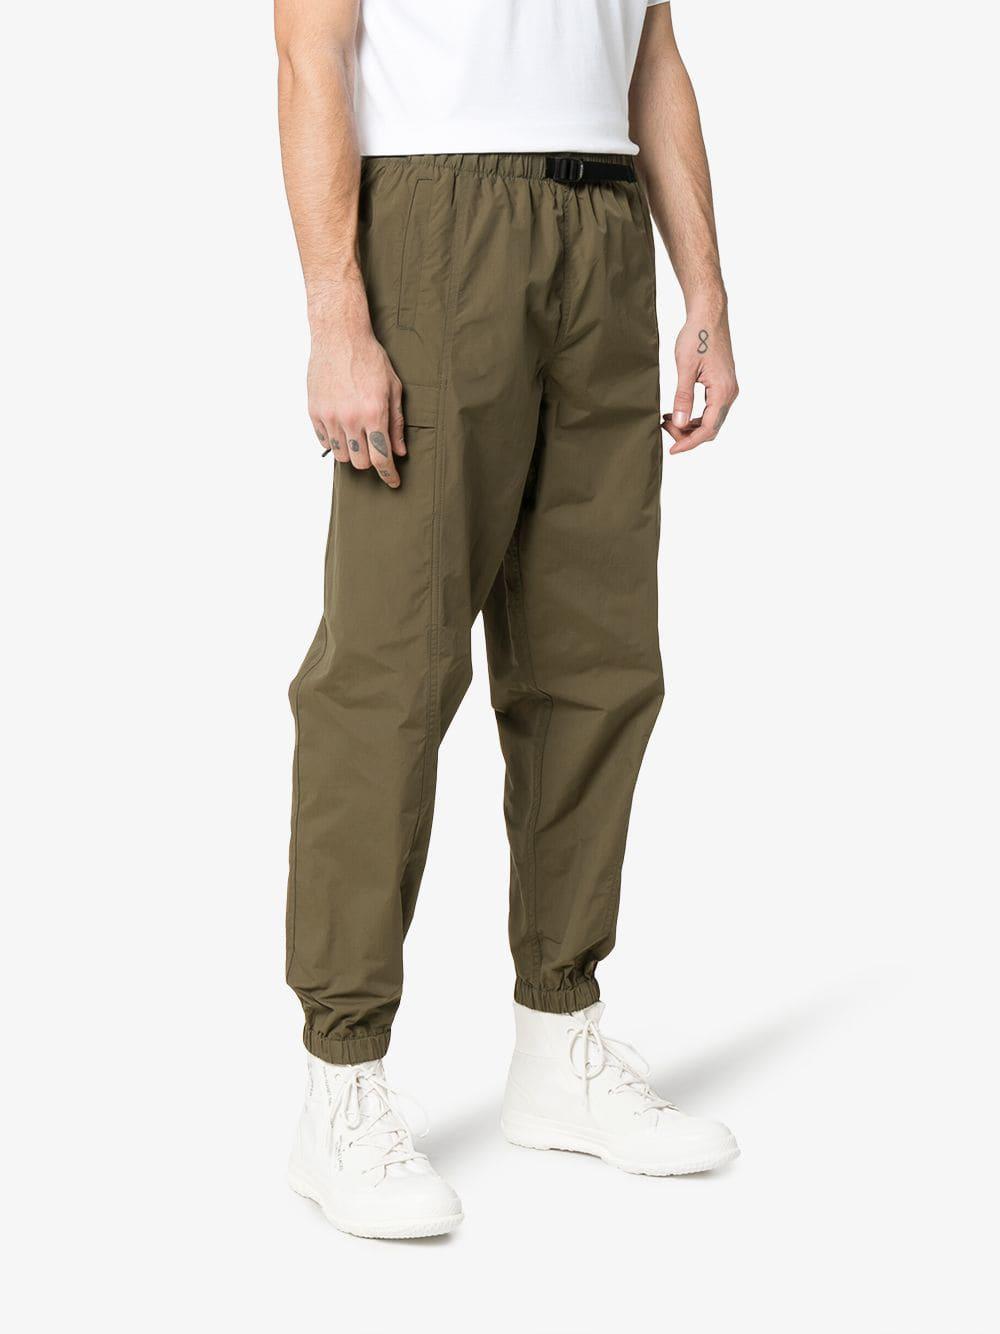 WTAPS Straight Leg Combat Trousers in Green for Men - Lyst